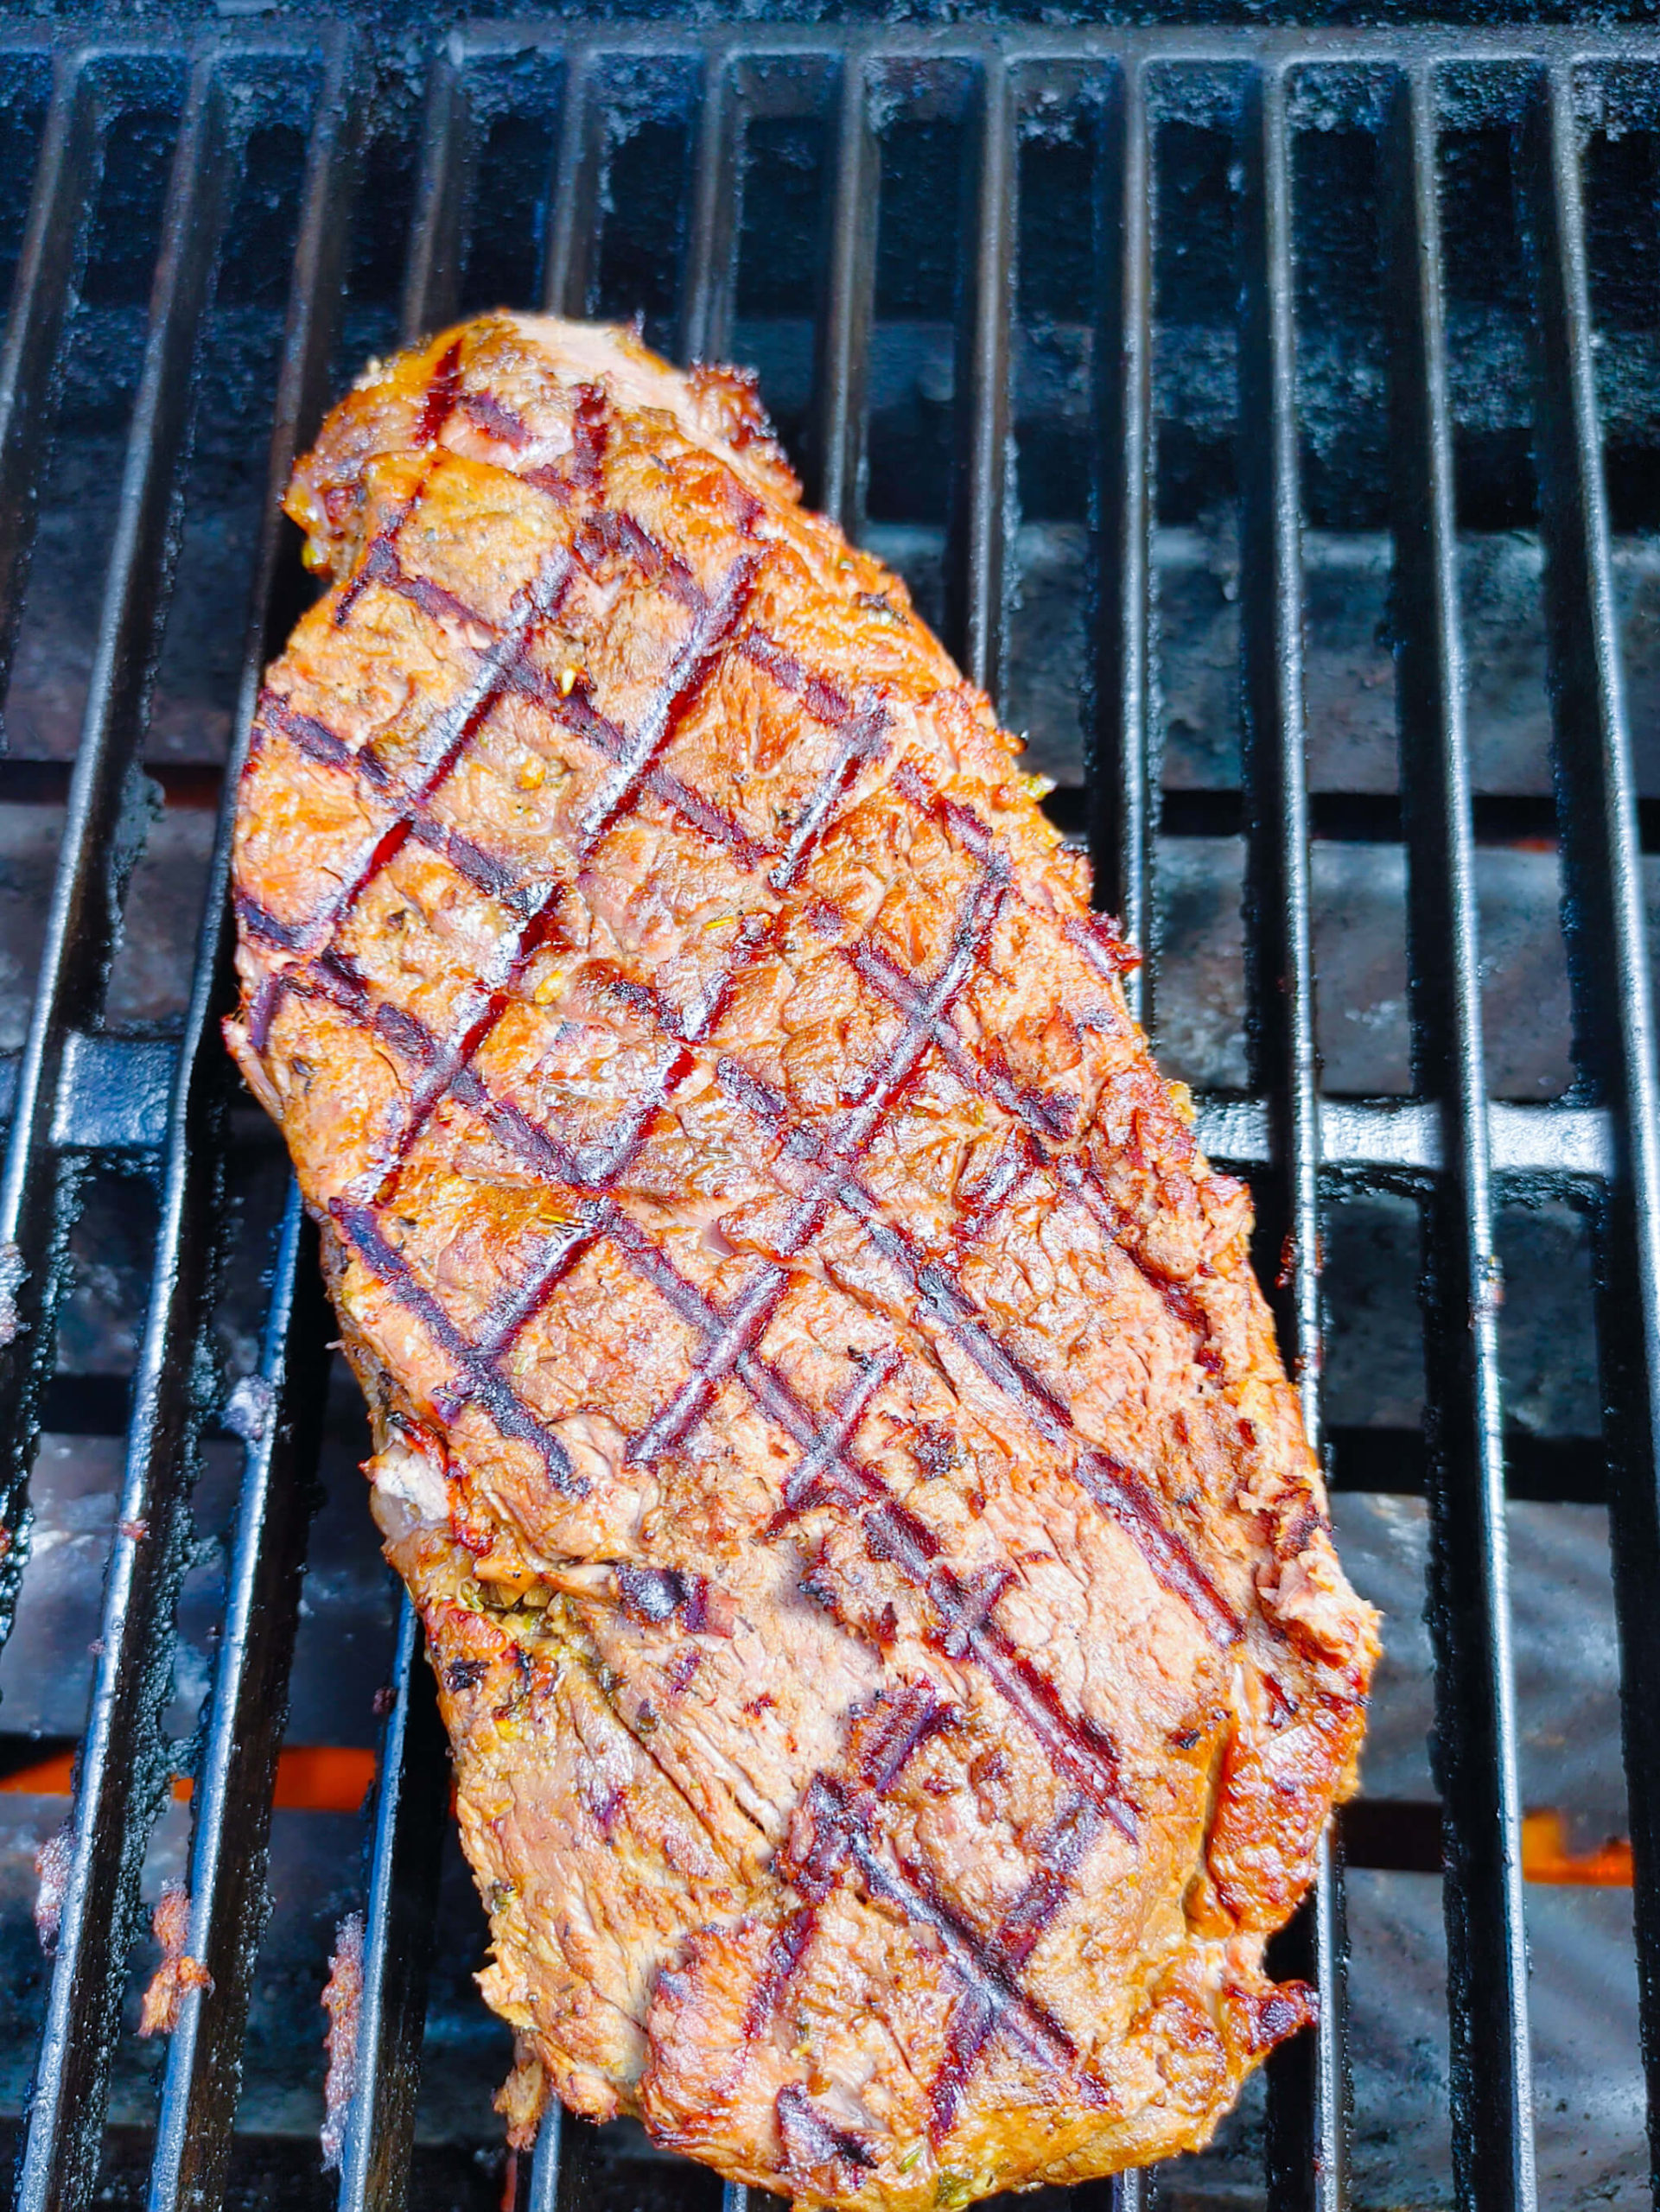 GRILL OR PAN SEAR A CRUST ON THE LONDON BROIL